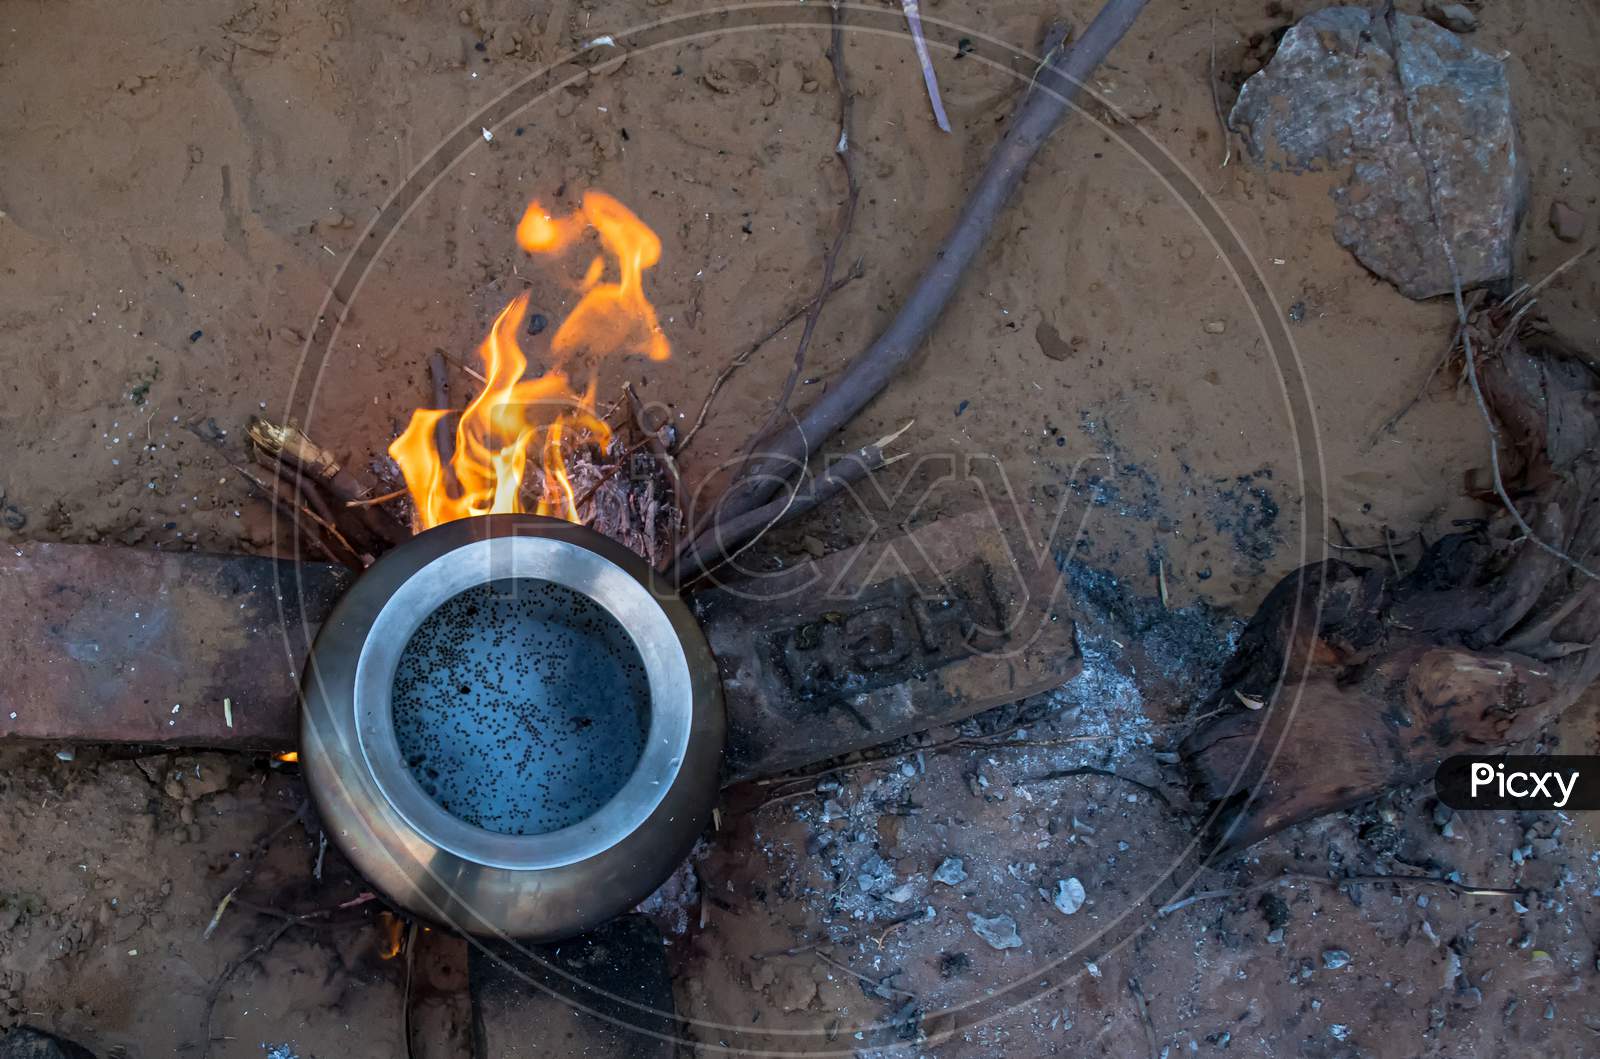 Cooking Food In Traditional Chulha (Stove).